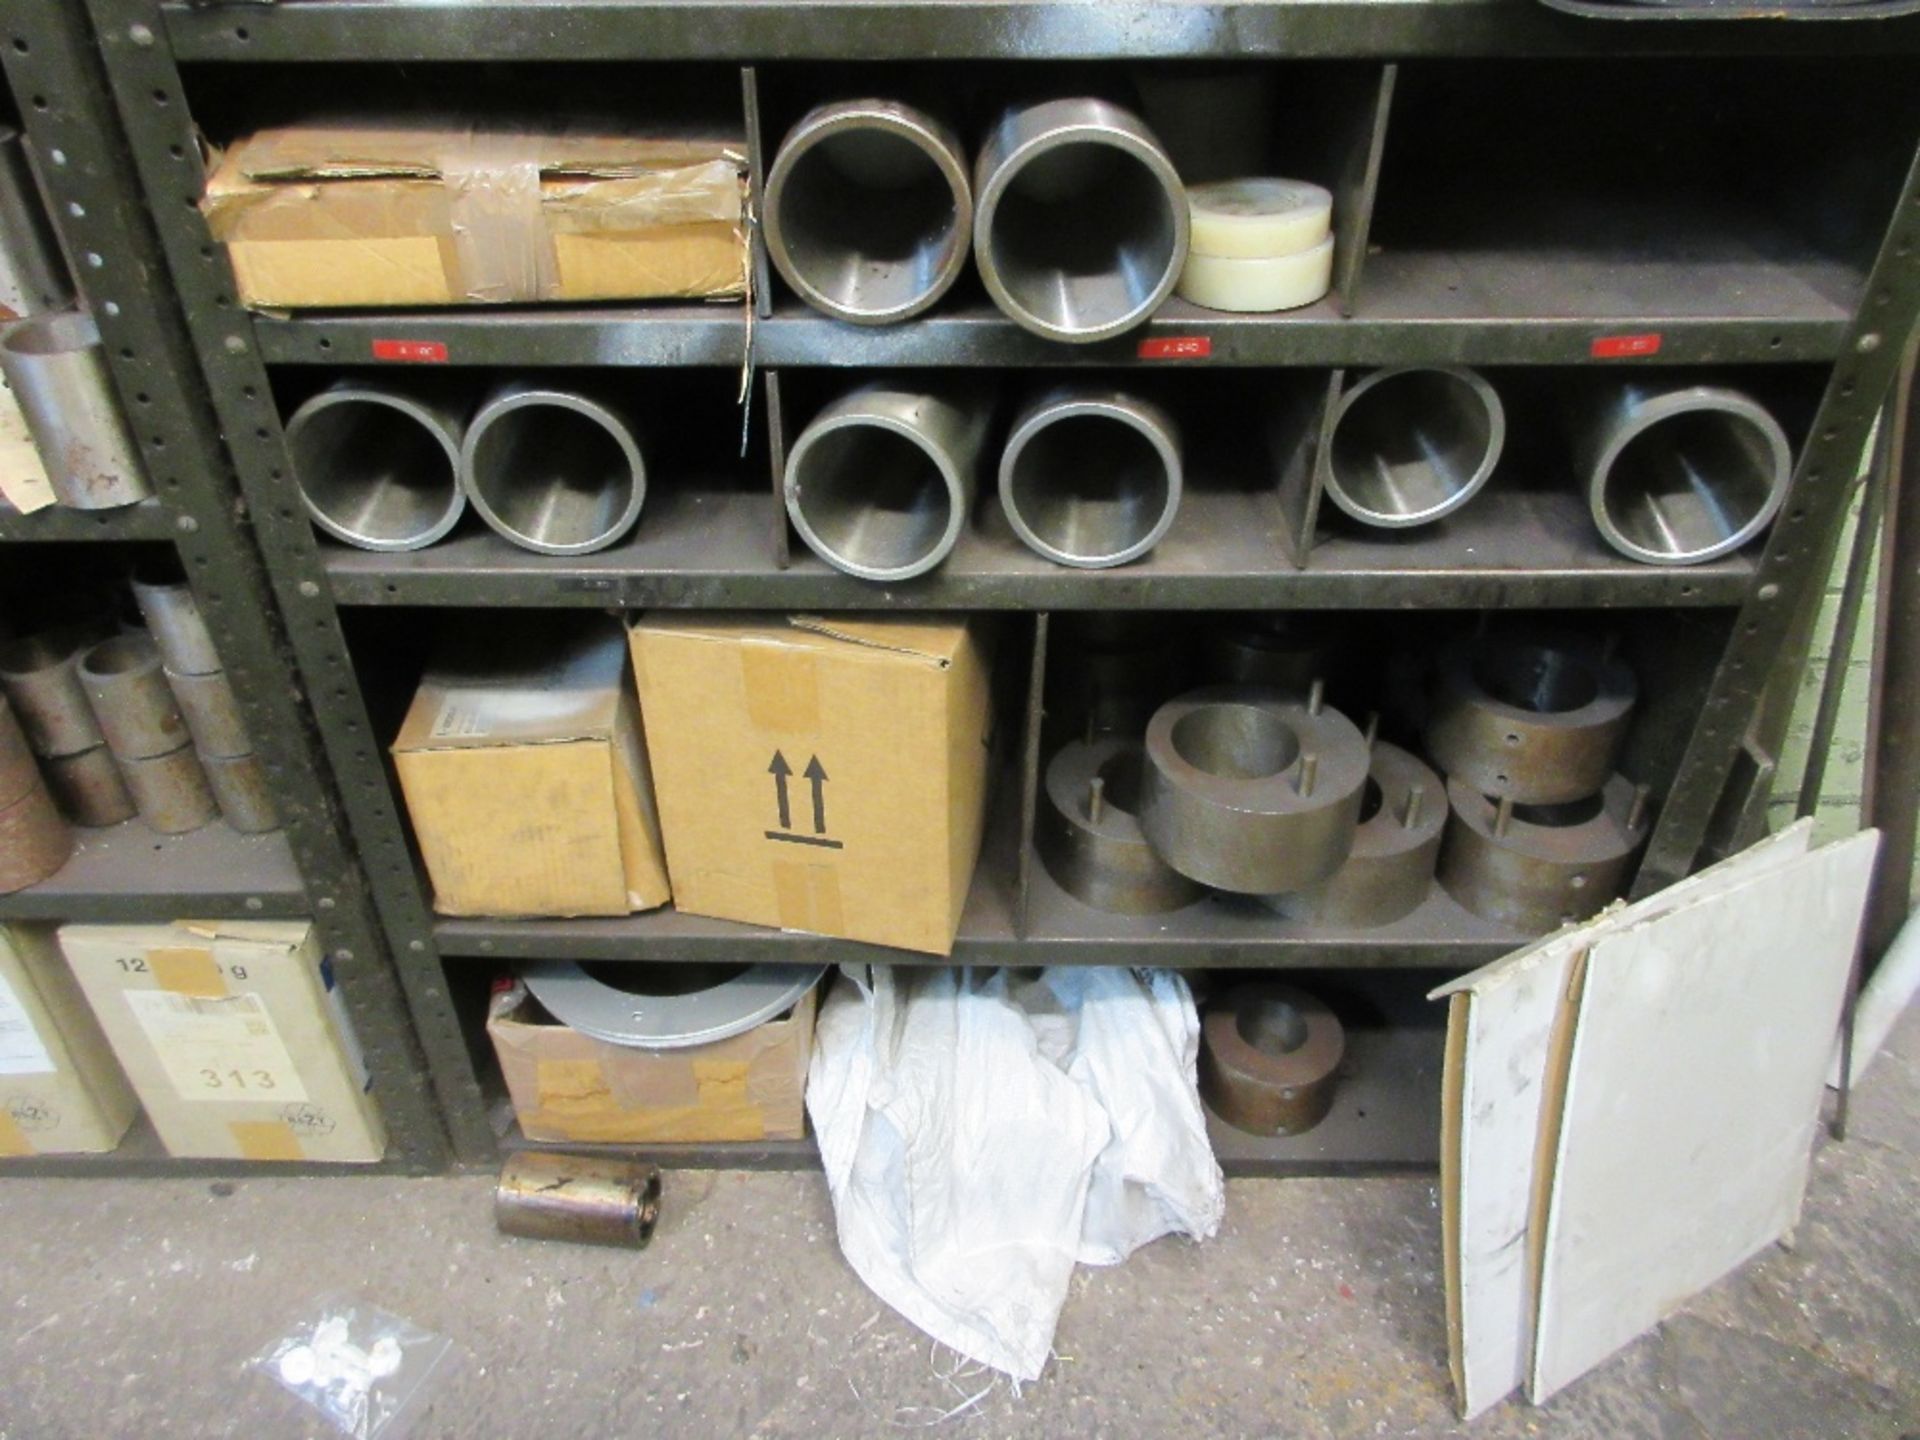 Cabinet containing Harden sleeves, cans of grease and various screws and fittings - Image 4 of 4